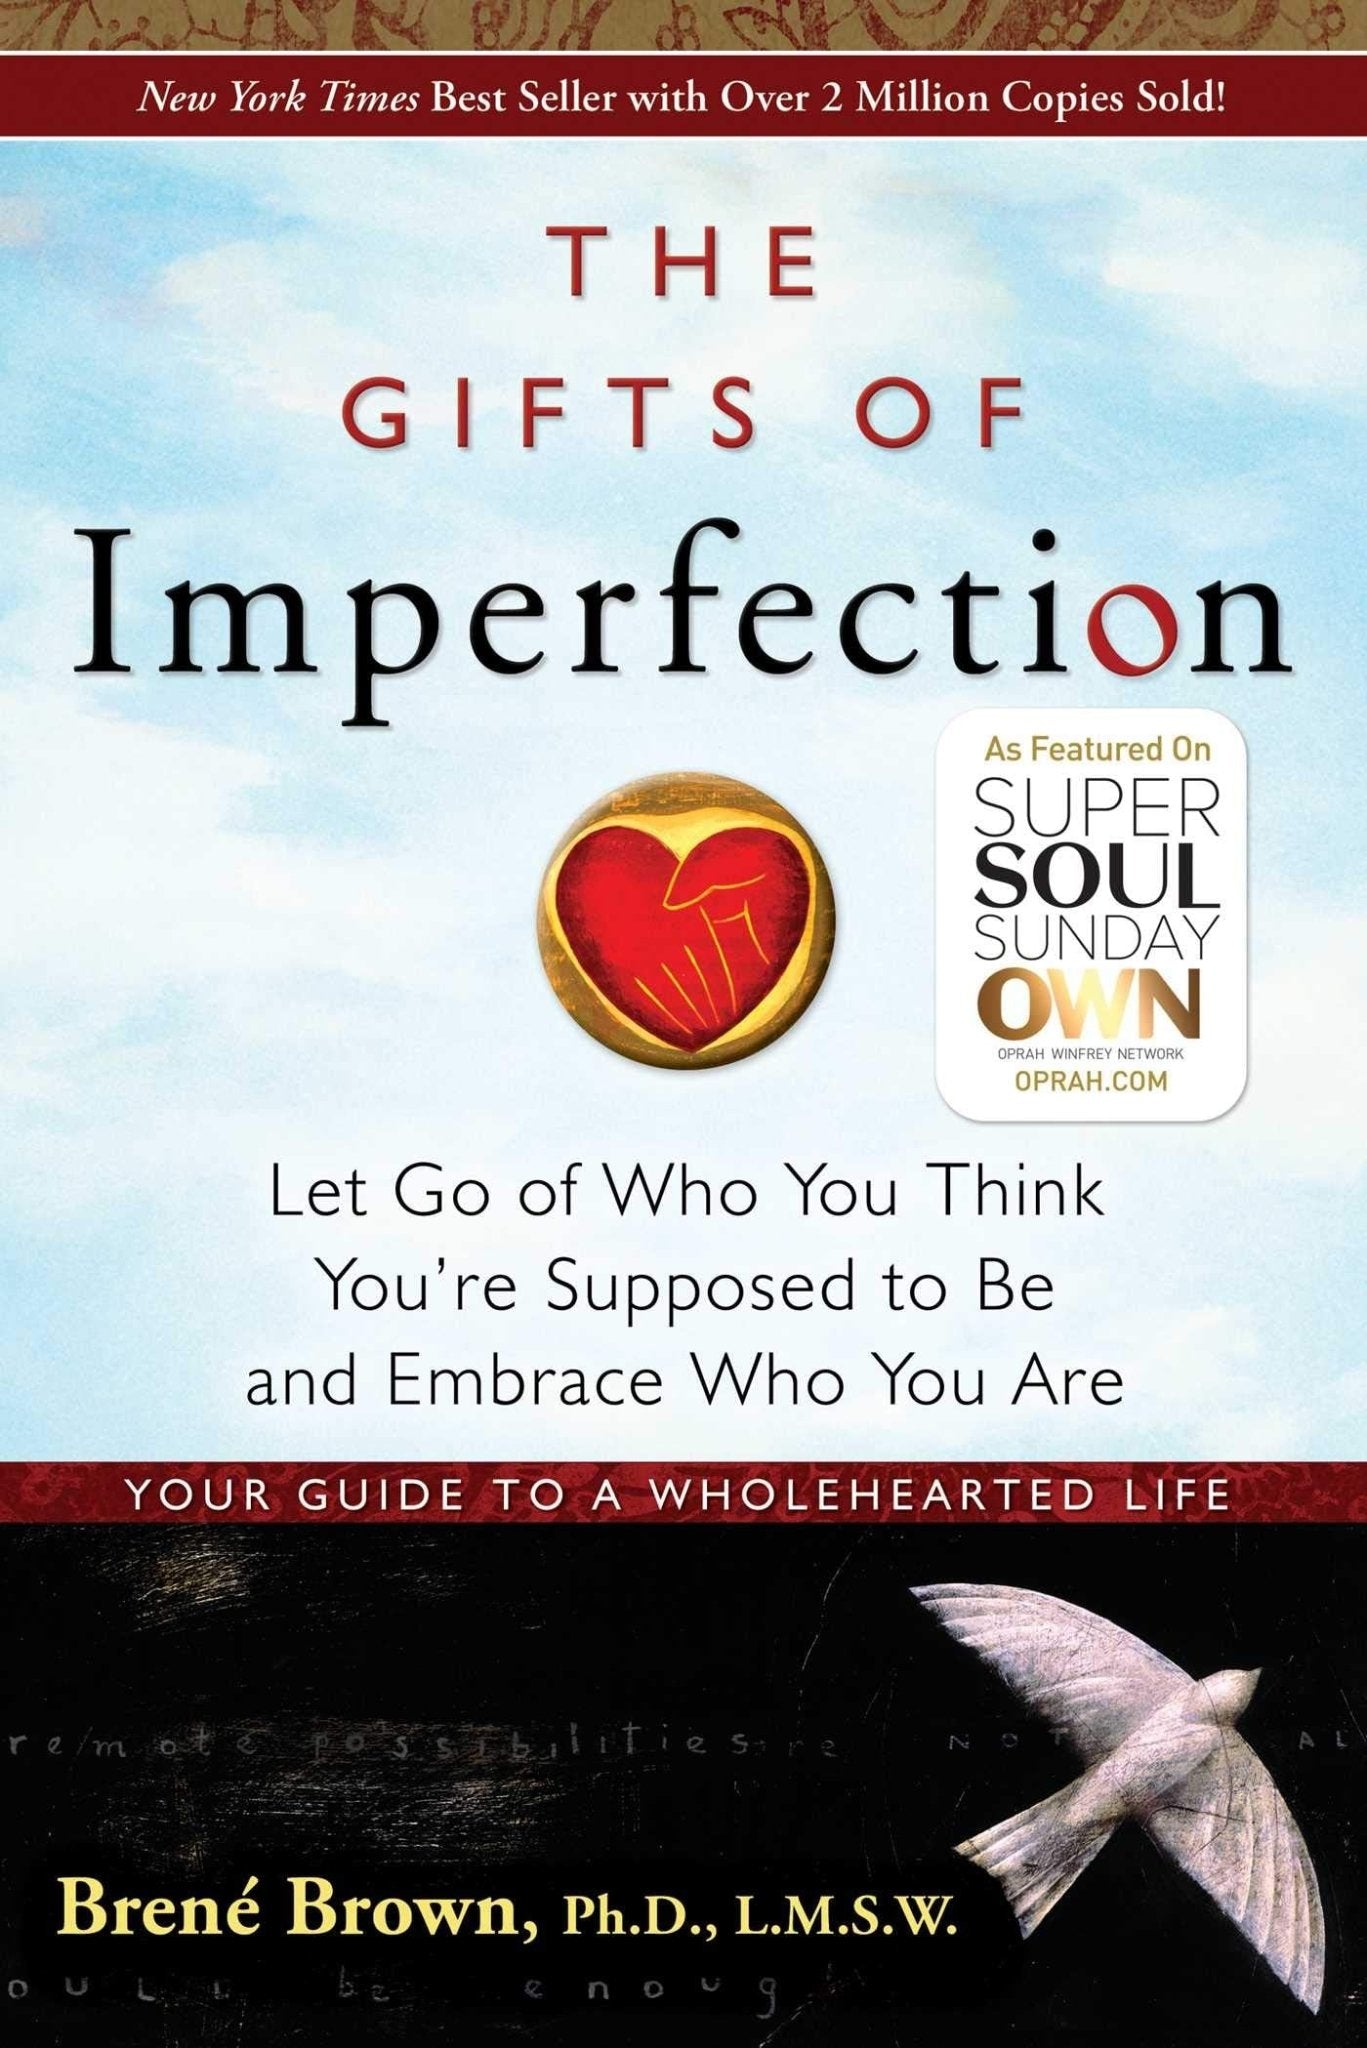 The Gifts of Imperfection: Let Go of Who You Think You're Supposed to Be and Embrace Who You Are by Brene Brown [Paperback] - LV'S Global Media